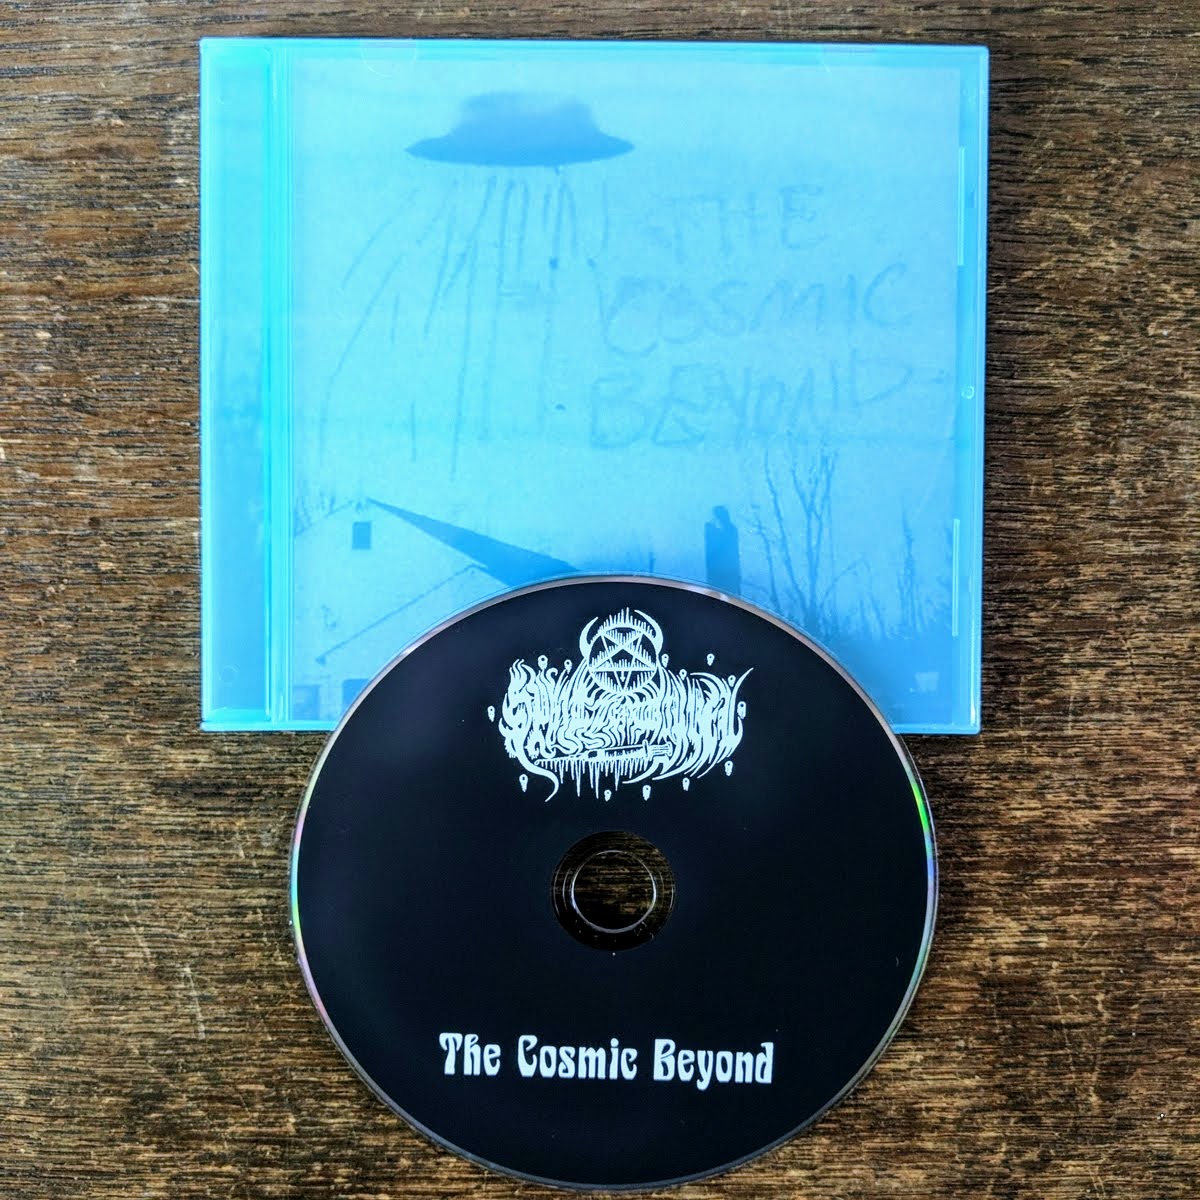 [SOLD OUT] SPRITZENWIRBEL "The Cosmic Beyond" CD (lim. 100)